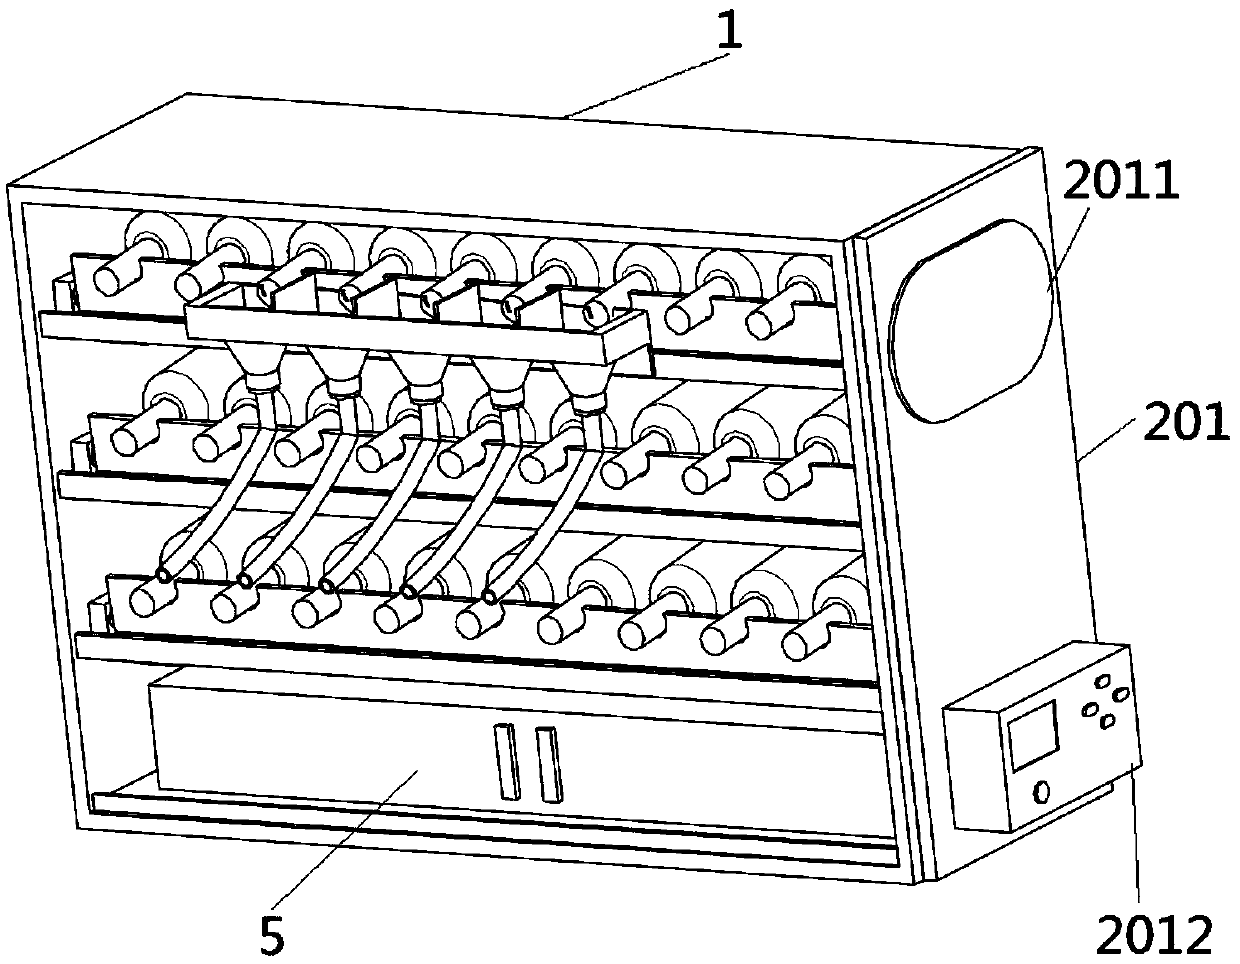 Wine cabinet carrying ultrasonic device